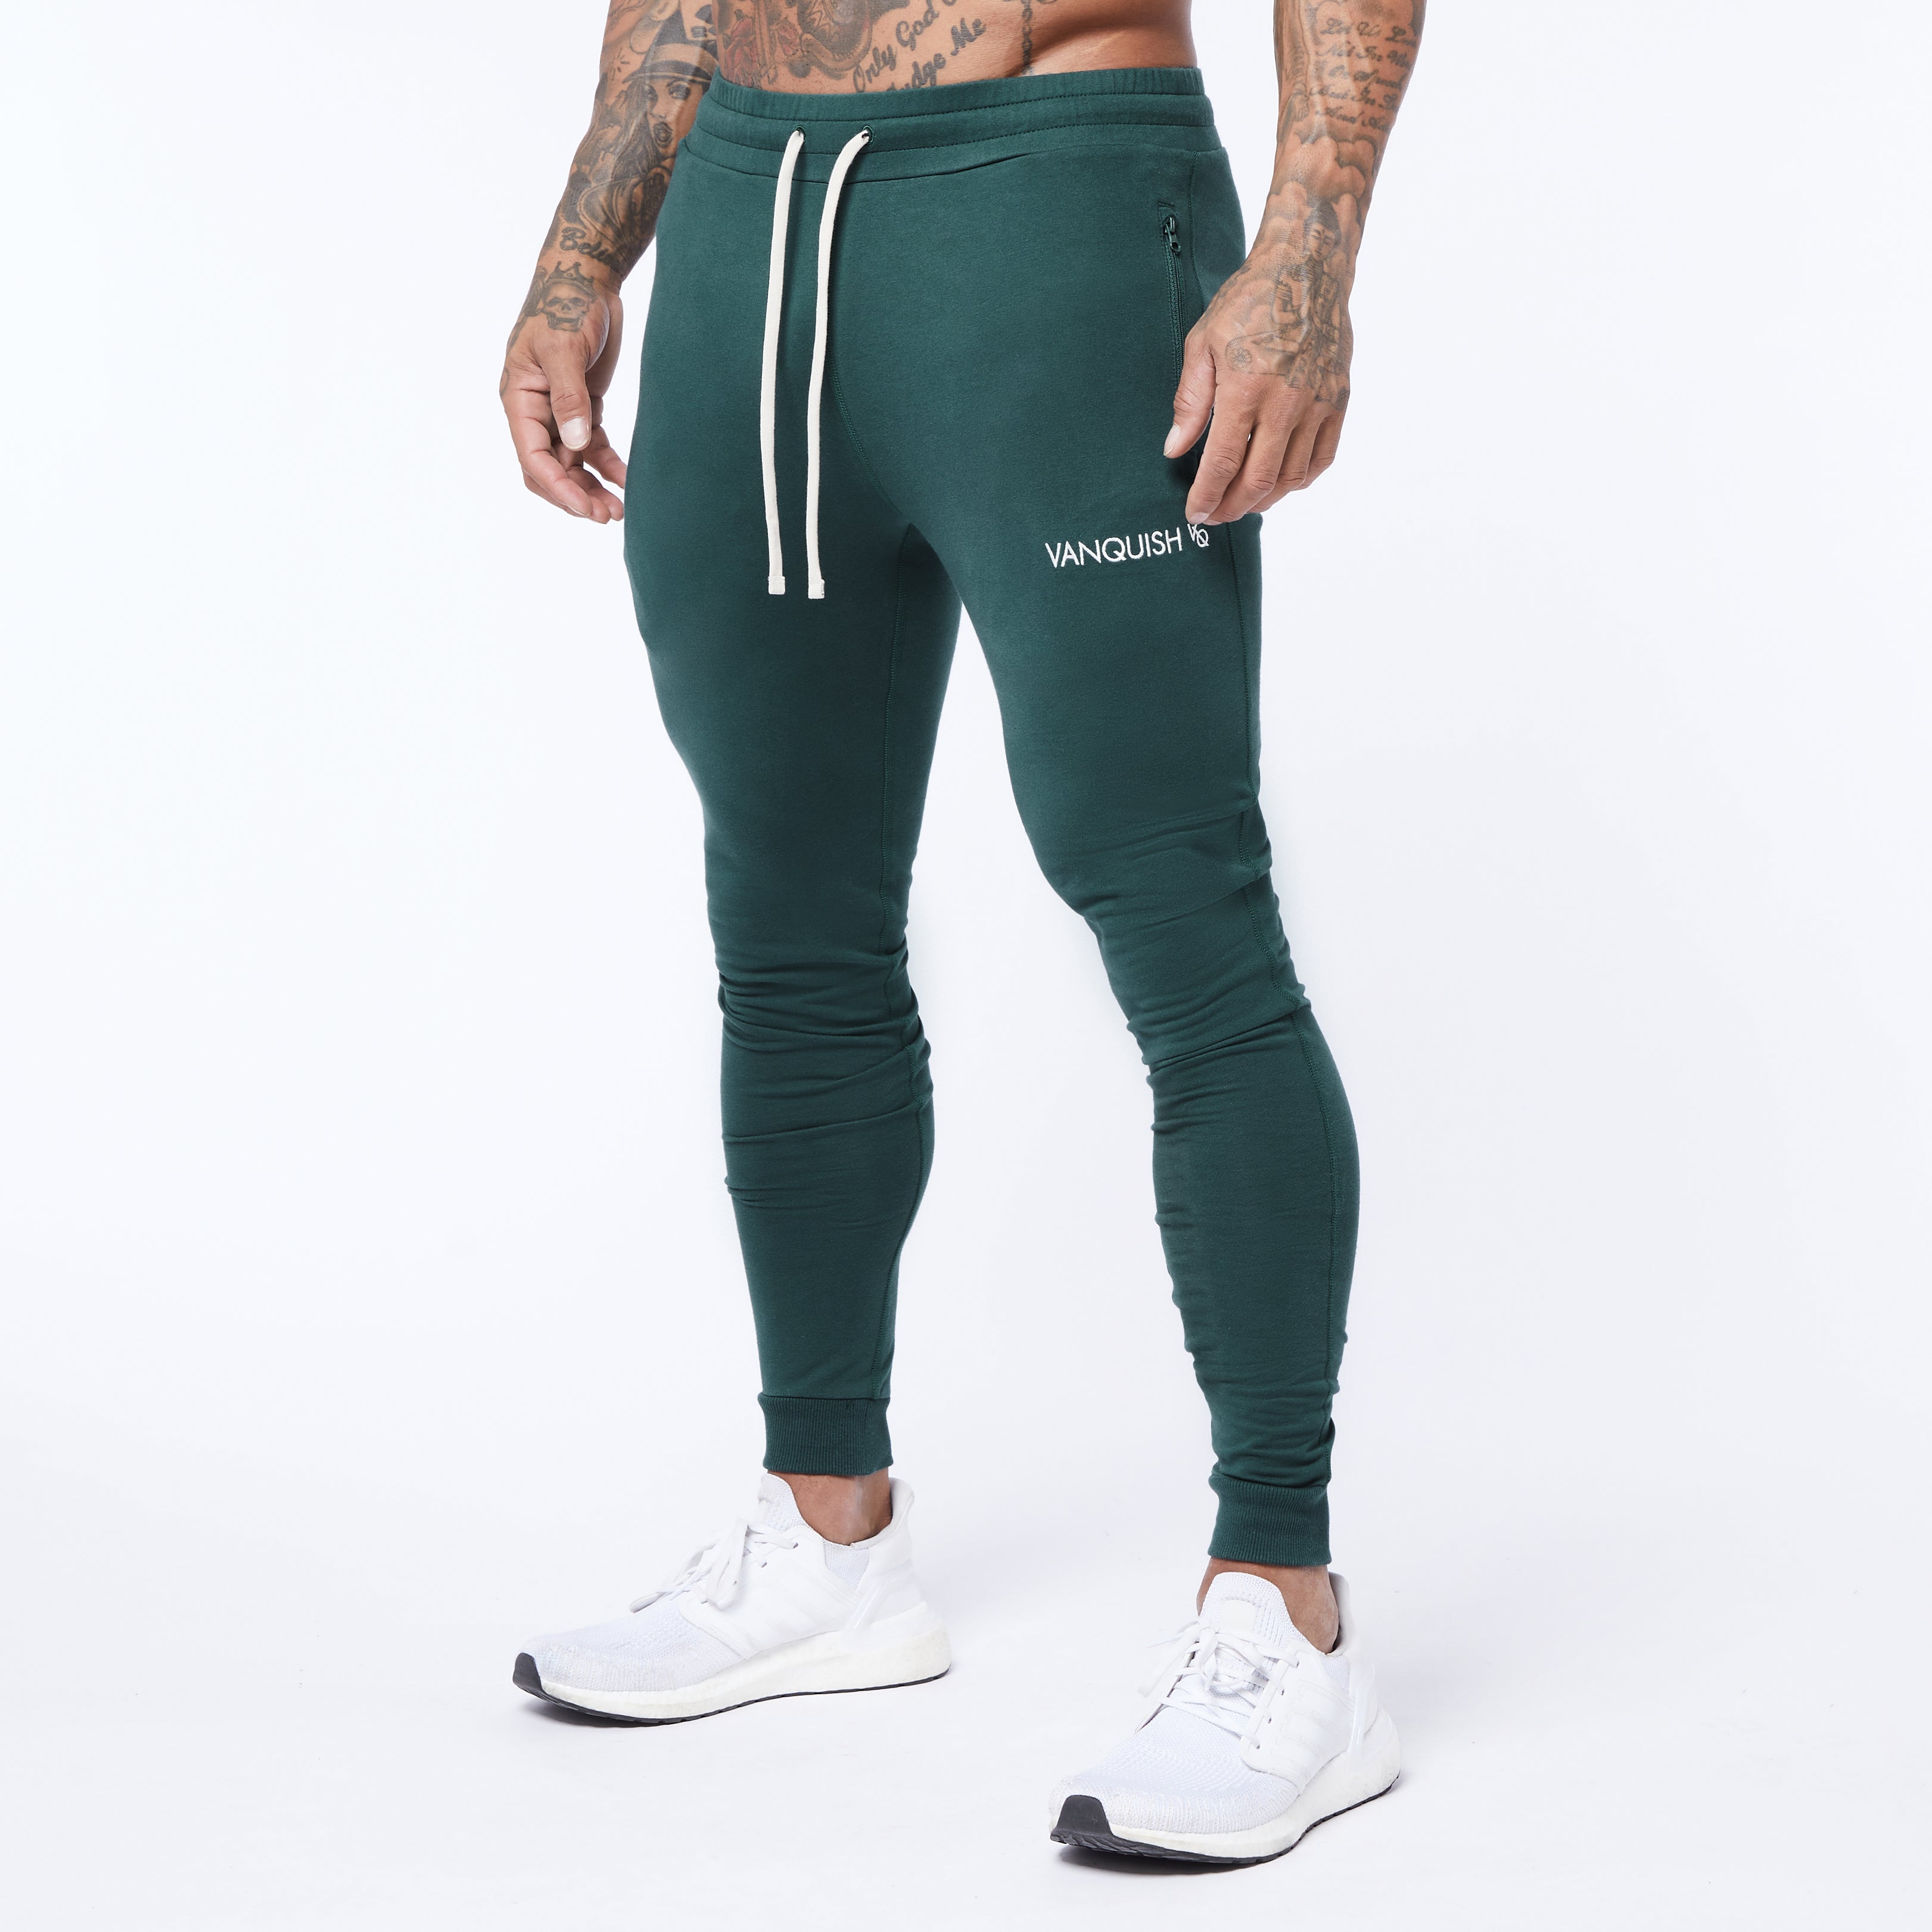 Vanquish Core Forest Green Tapered Sweatpants